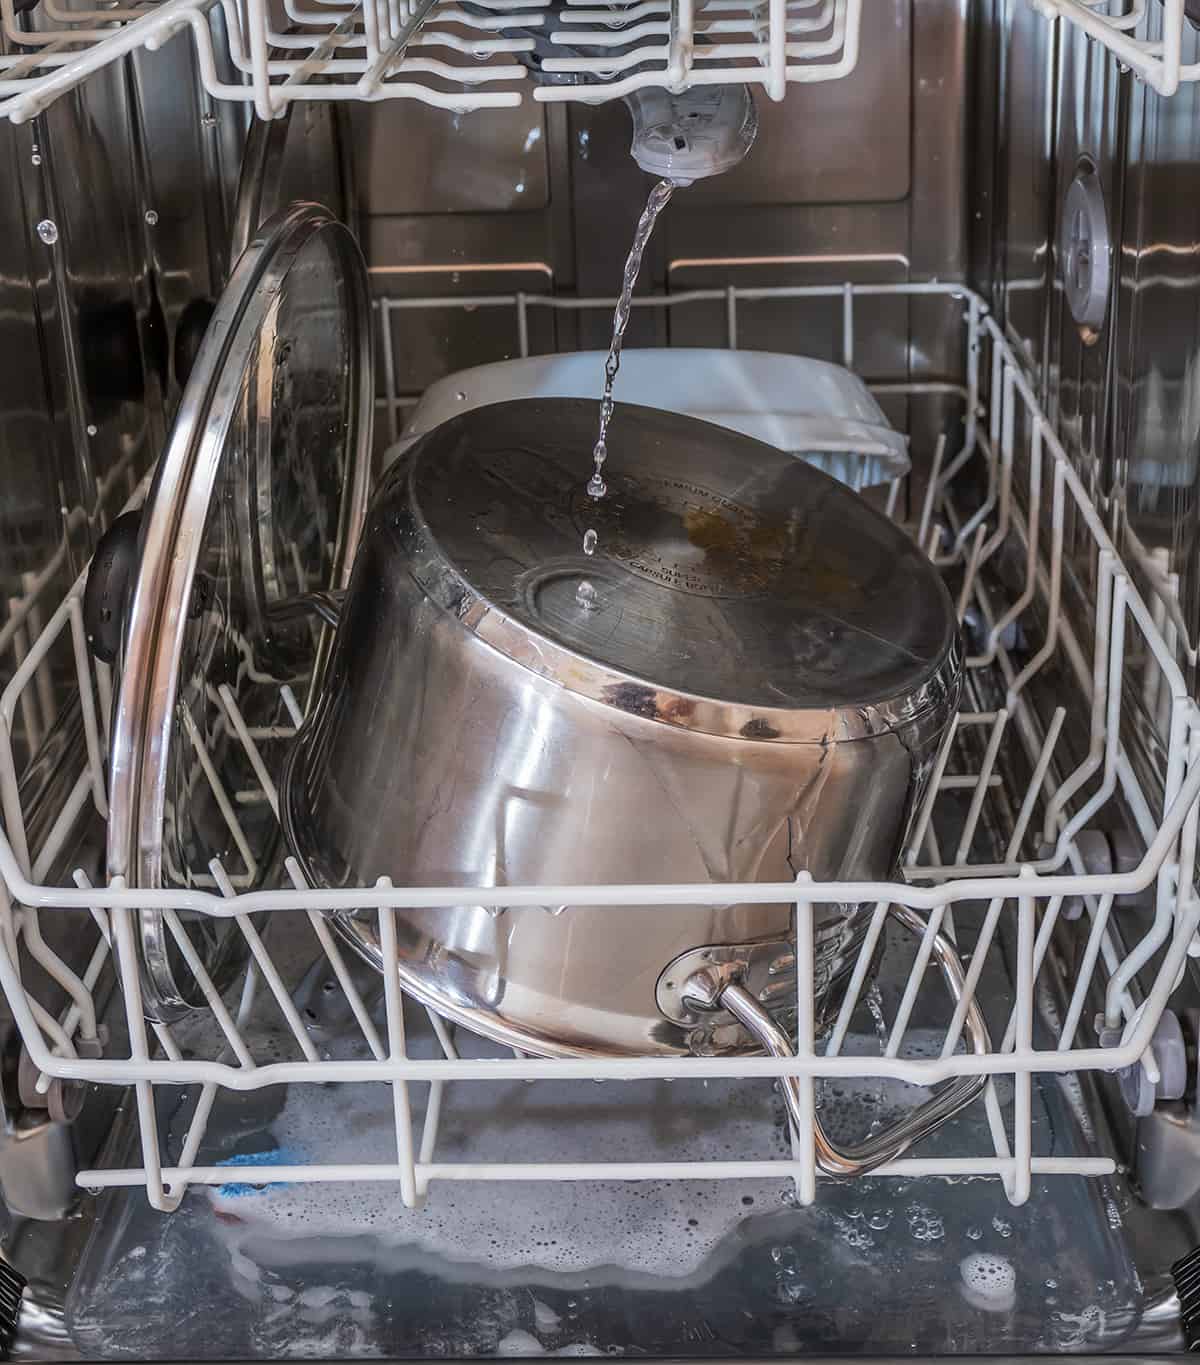 Why is My Dishwasher Running Longer Than Usual